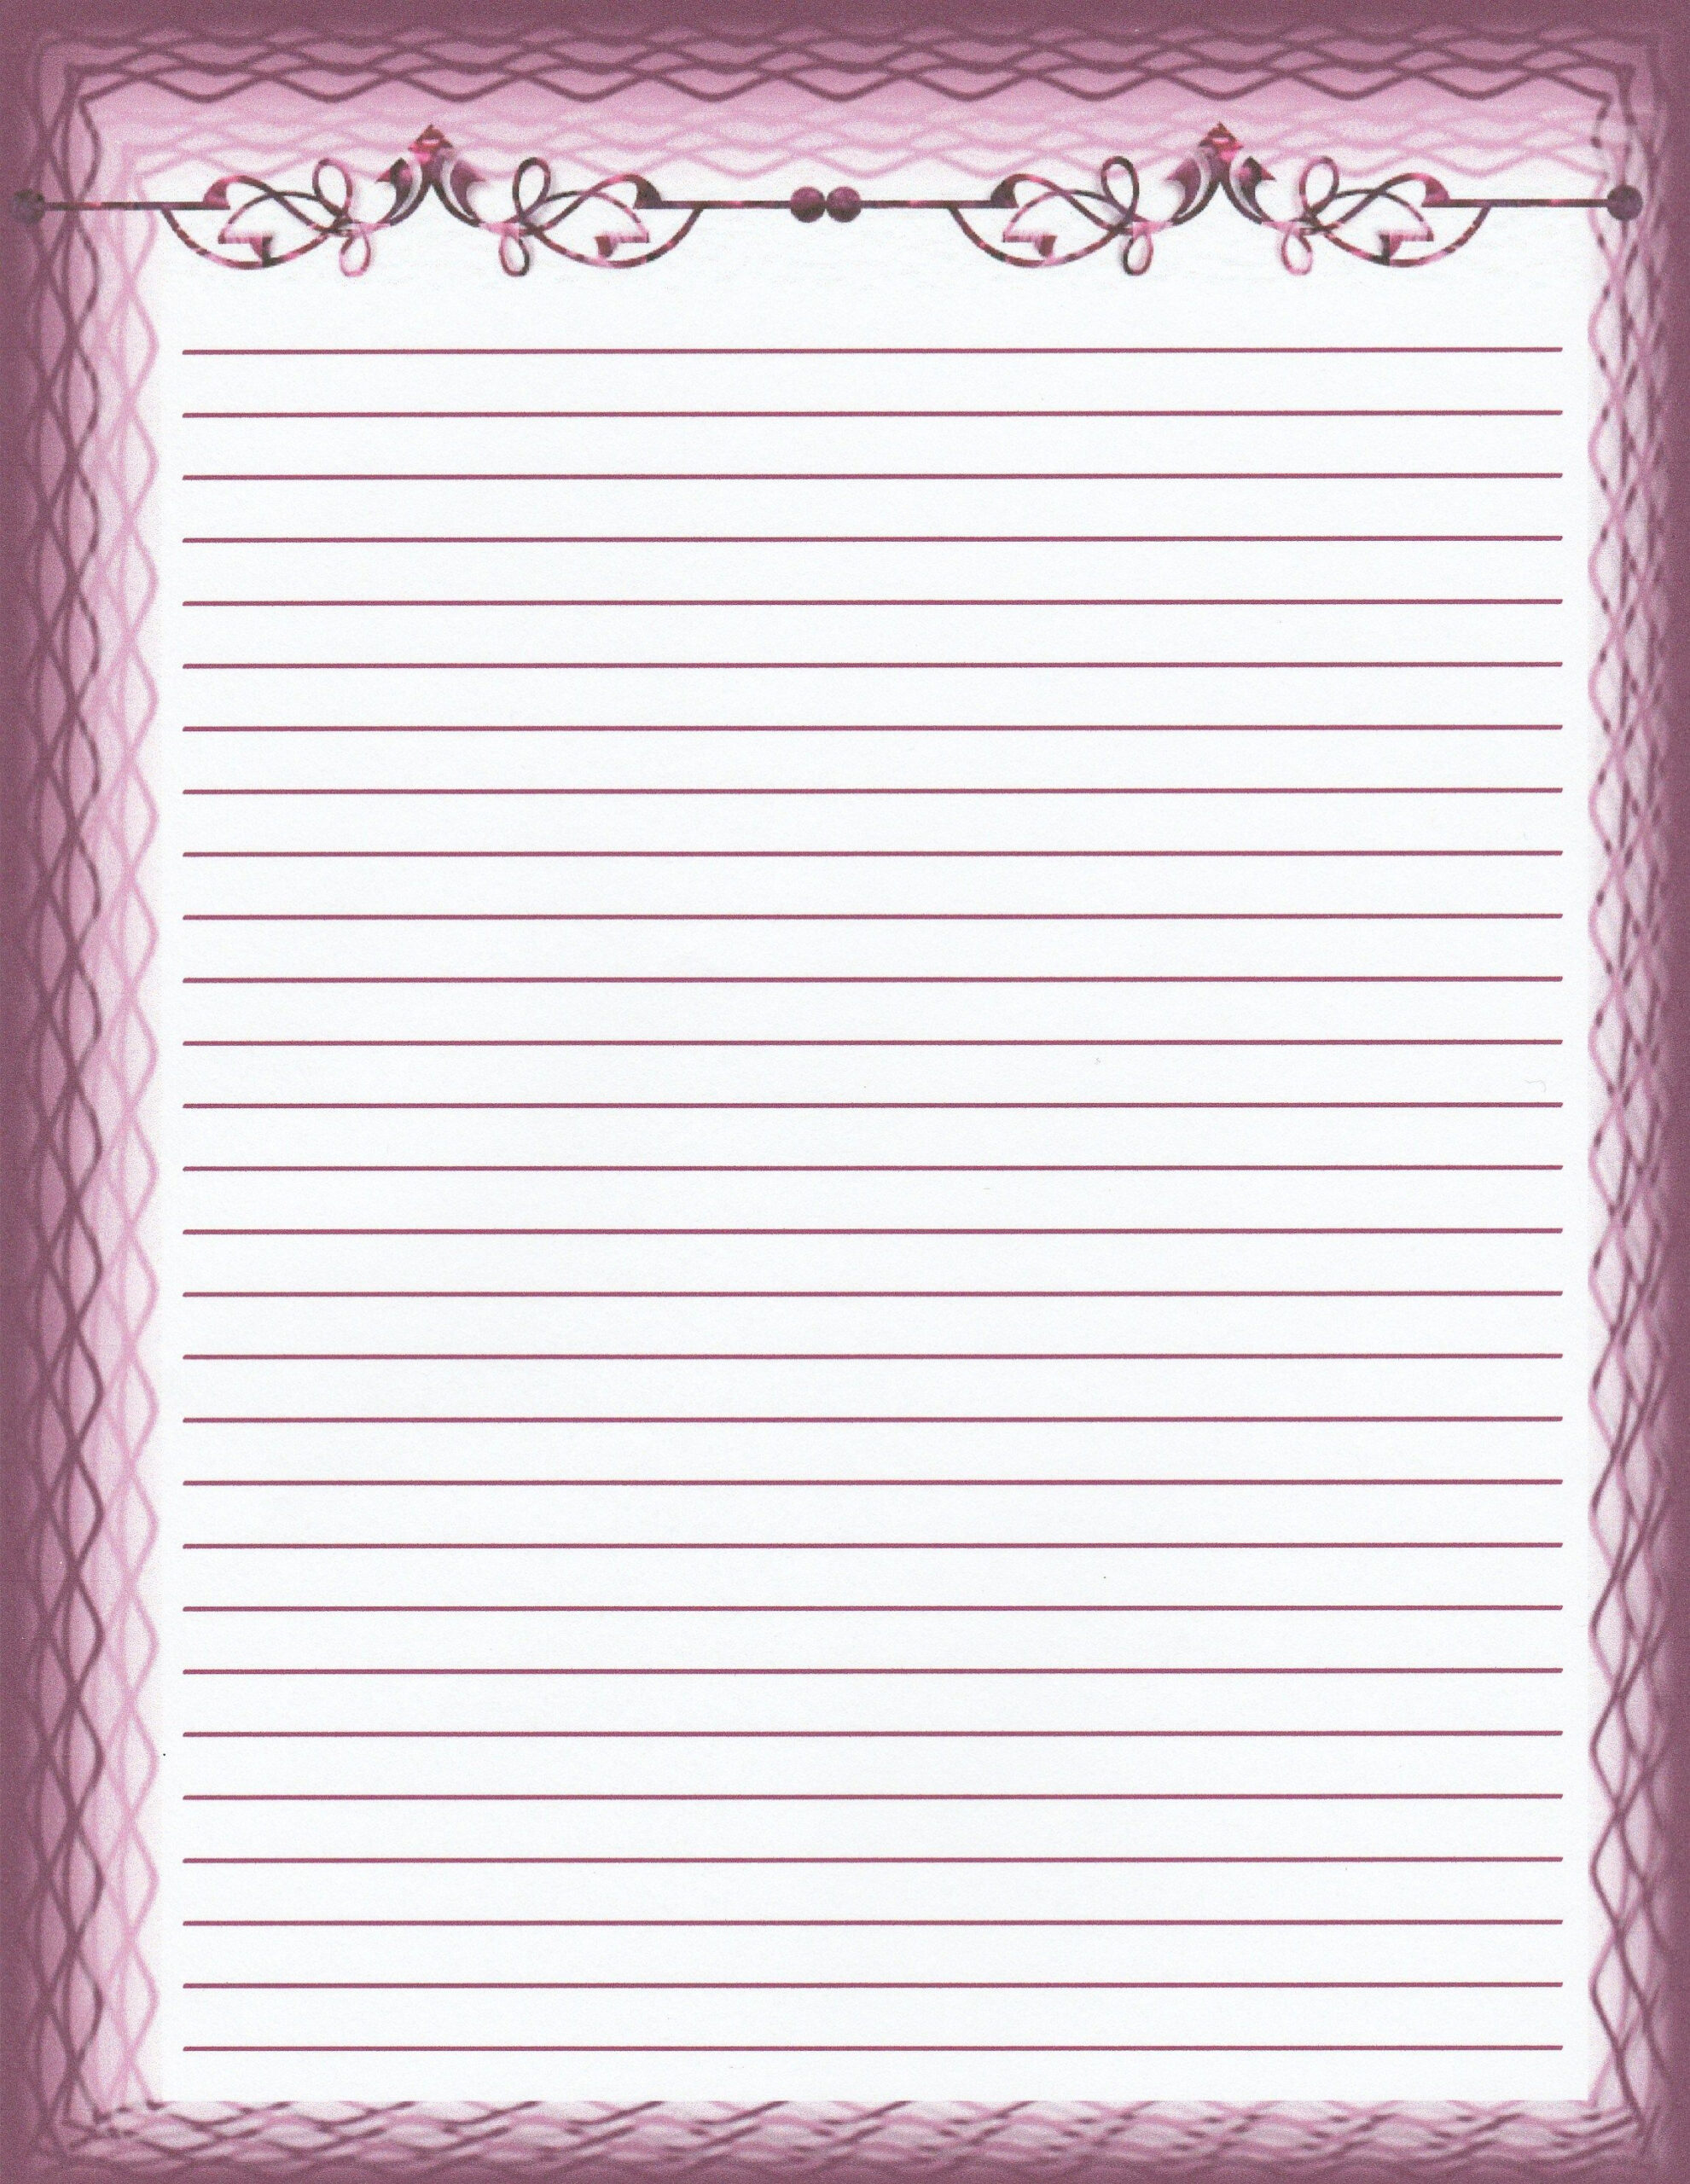 Free Printable Stationery Lined Writing Paper